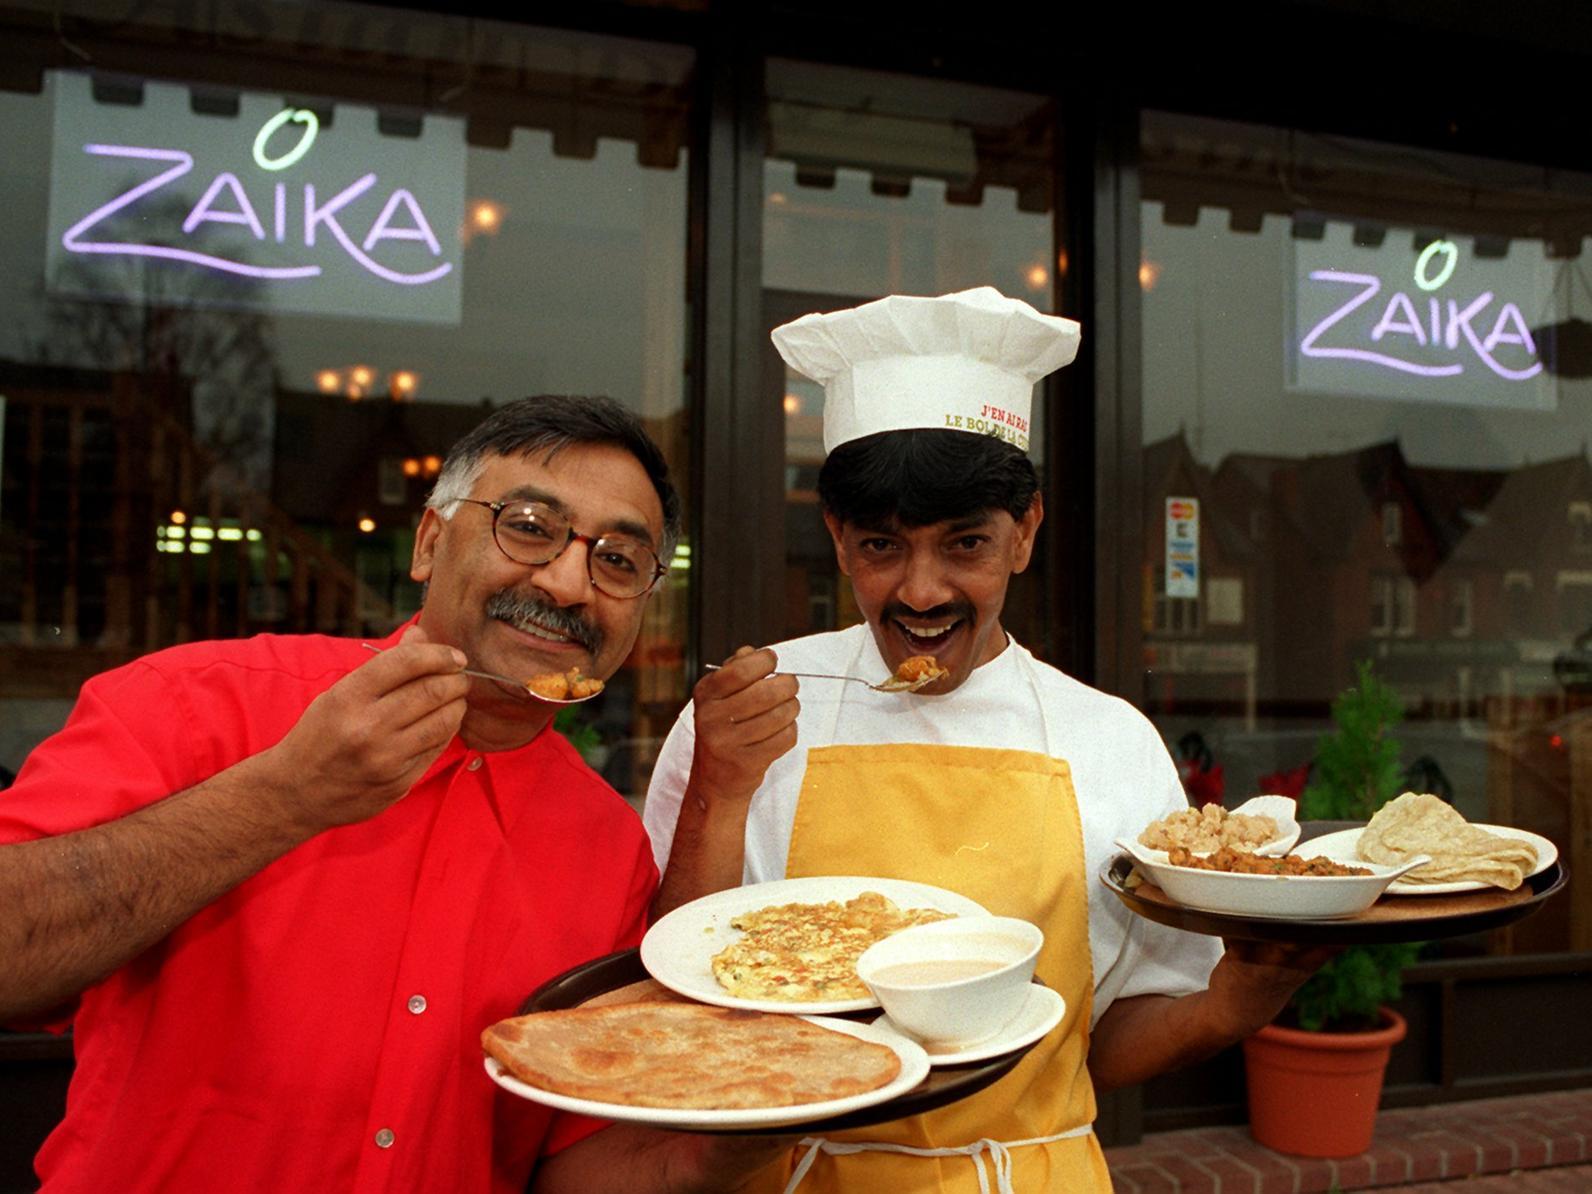 December 1996 and Zaika on Roundhay Road became the first Asian restaurant in Leeds too serve a tradtional Punjabi breakfast on a weekend.